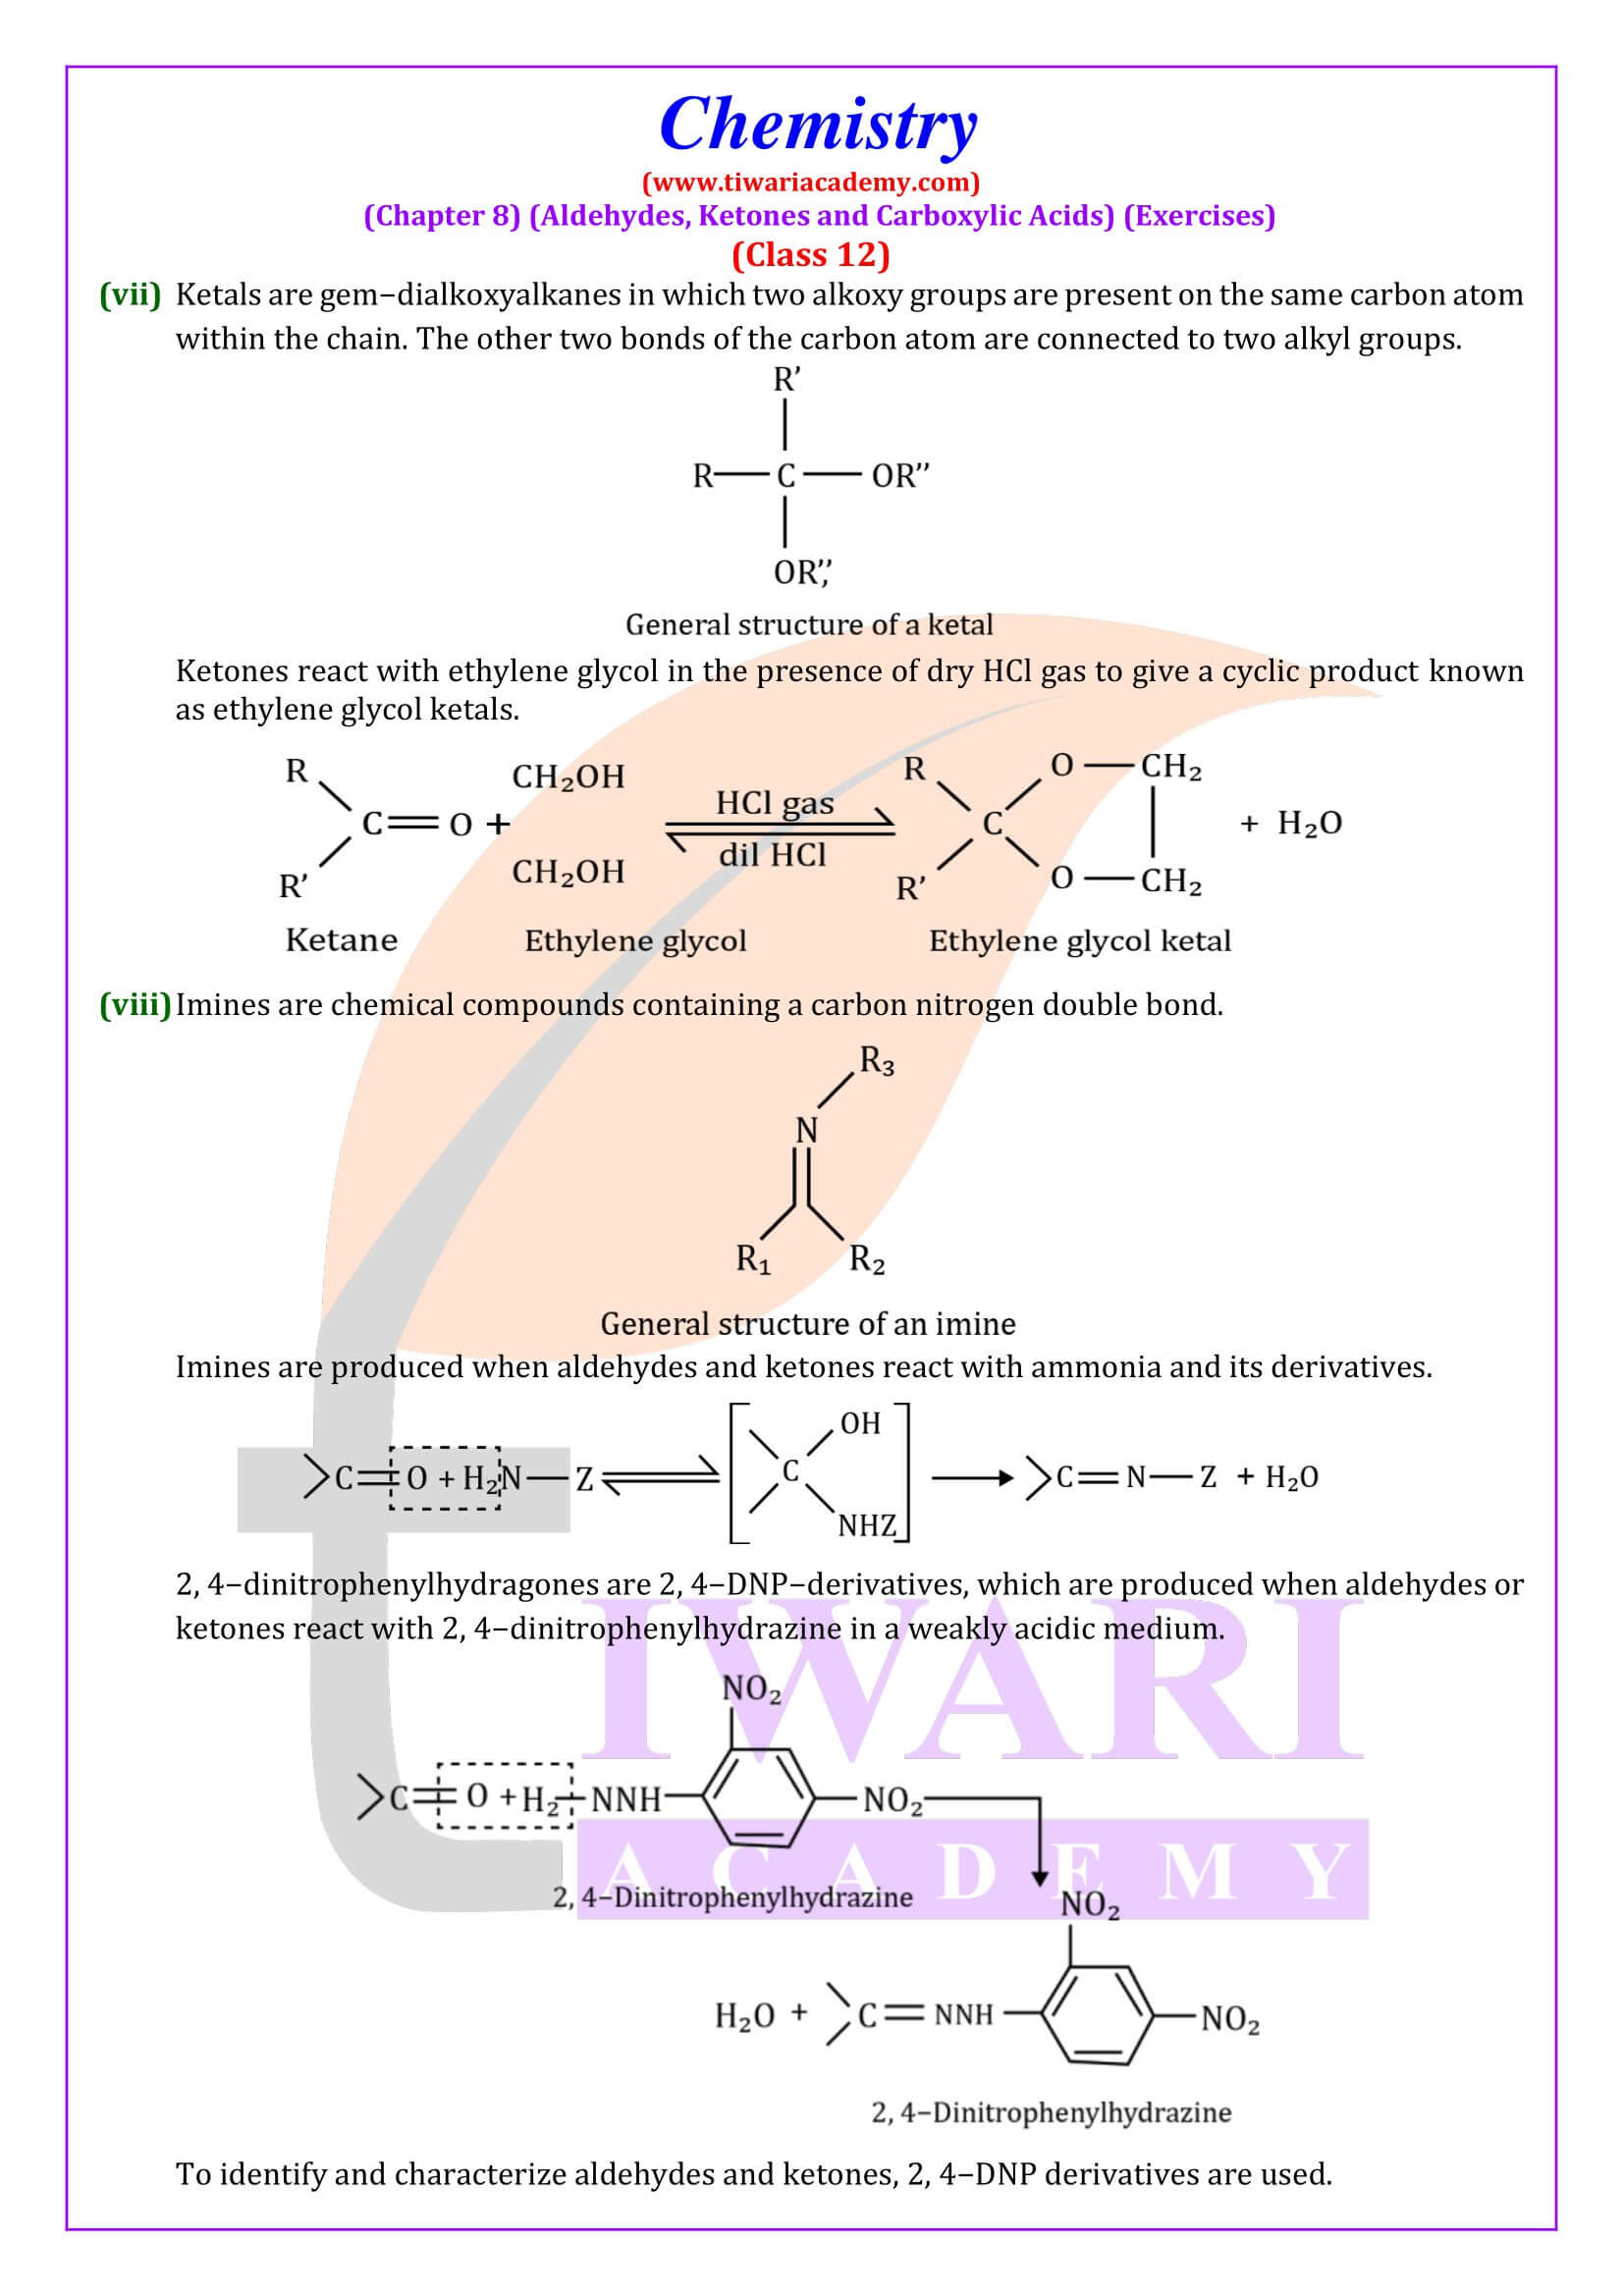 NCERT Solutions for Class 12 Chemistry Chapter 8 Exercises